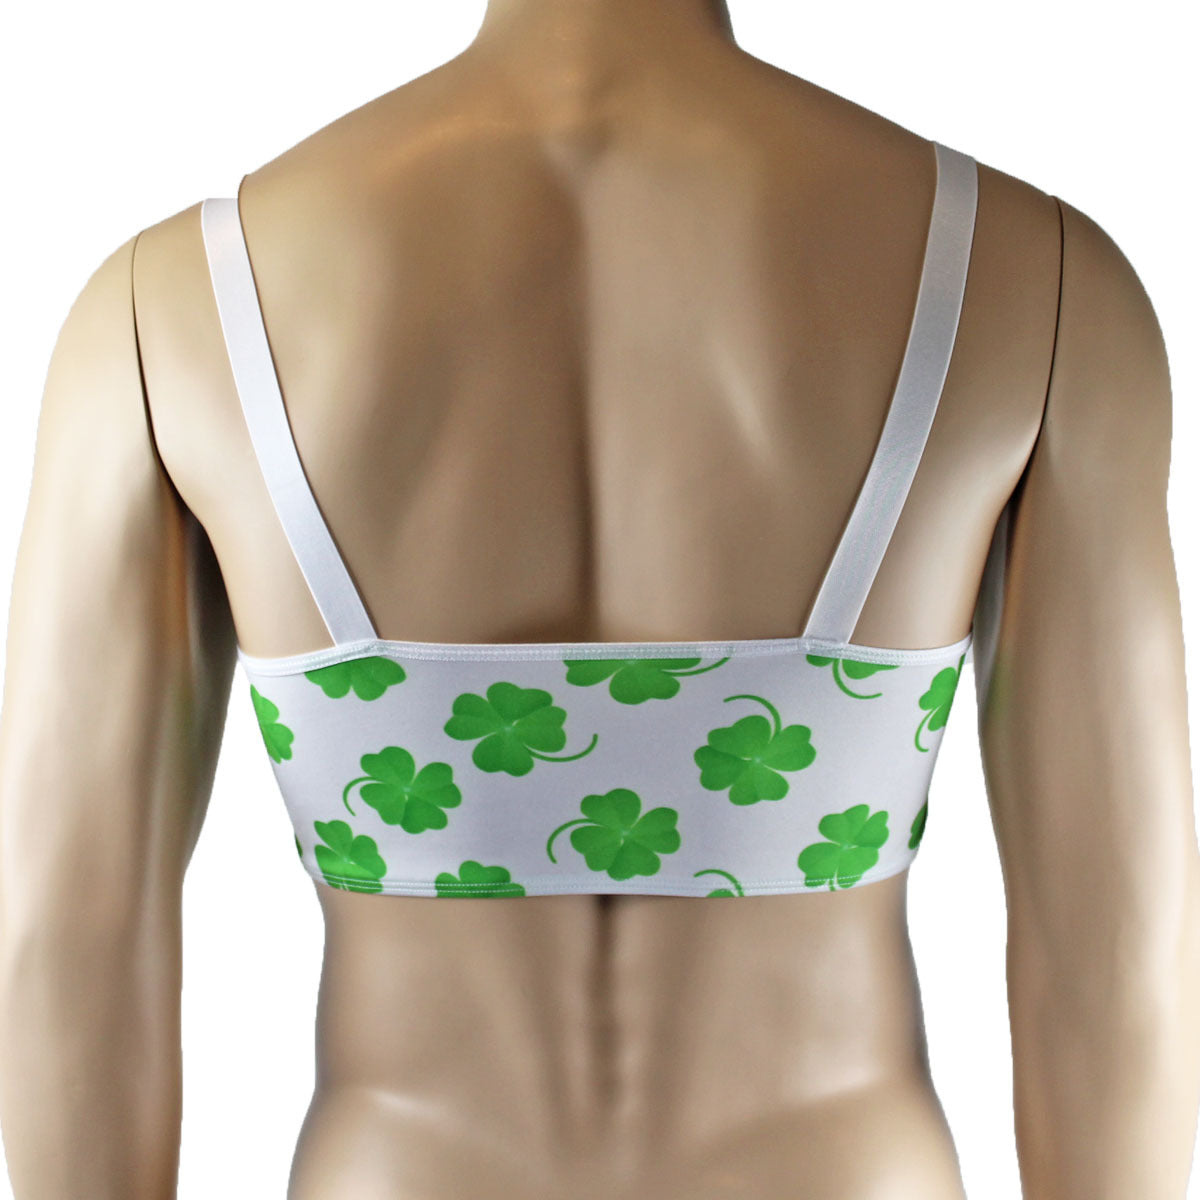 Mens St Patricks Day Lucky 4 Leaf Clover Crop Top and Thong G string